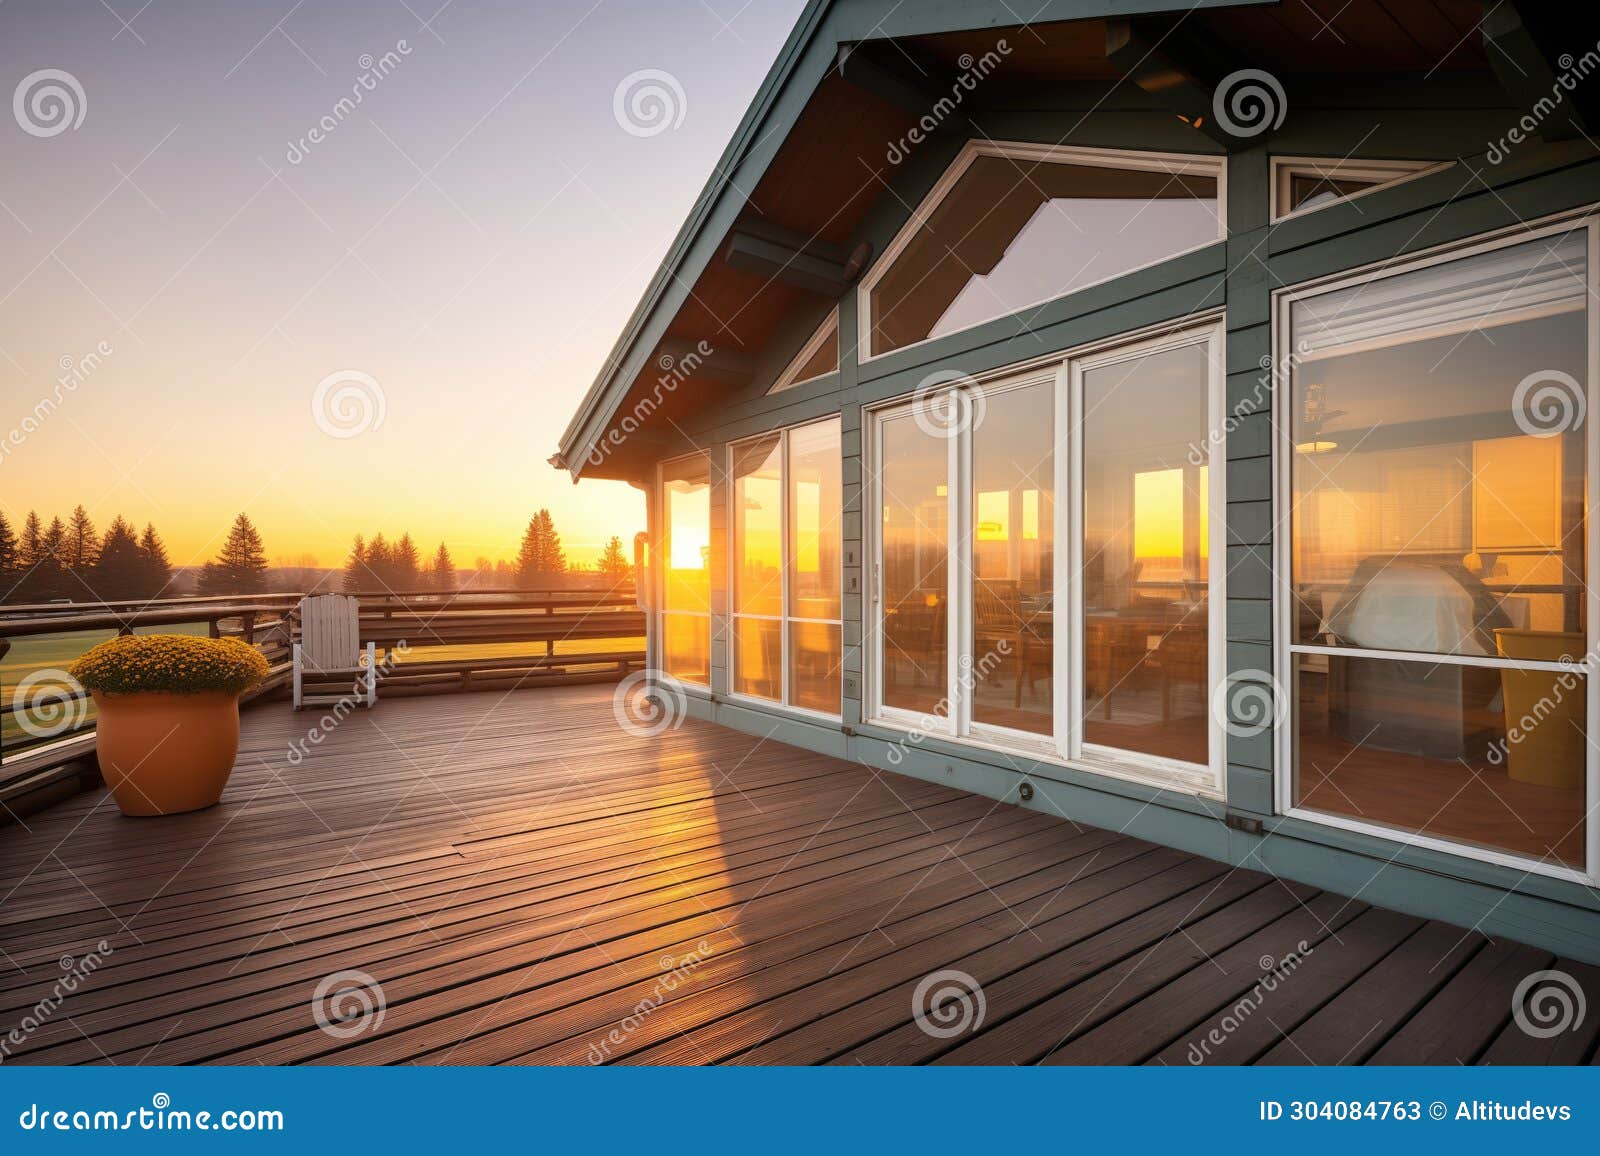 sunrise casting glow on a log cabin with fulllength glass windows